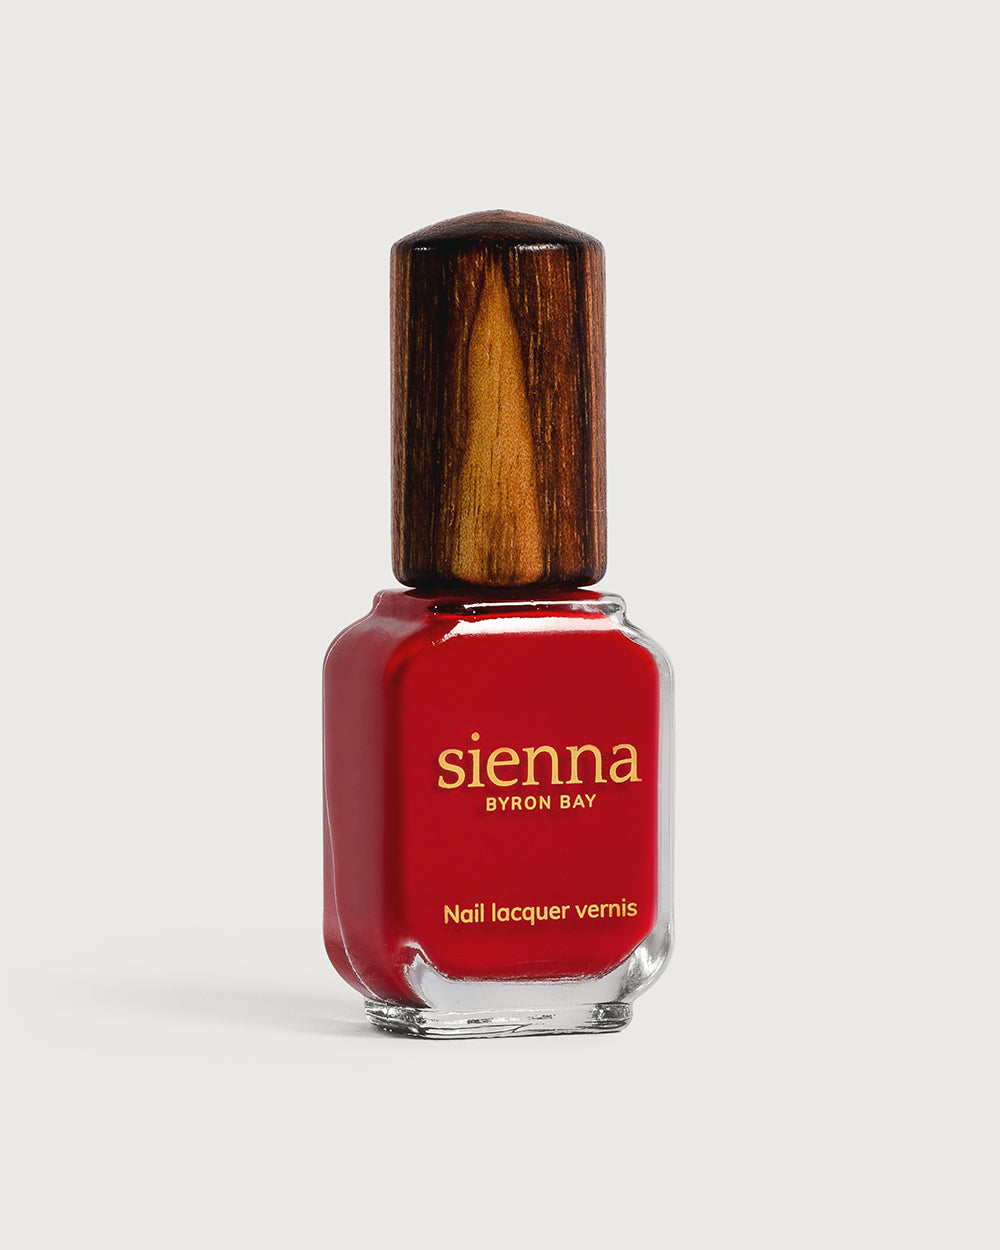 Classic red nail polish glass bottle with timber cap